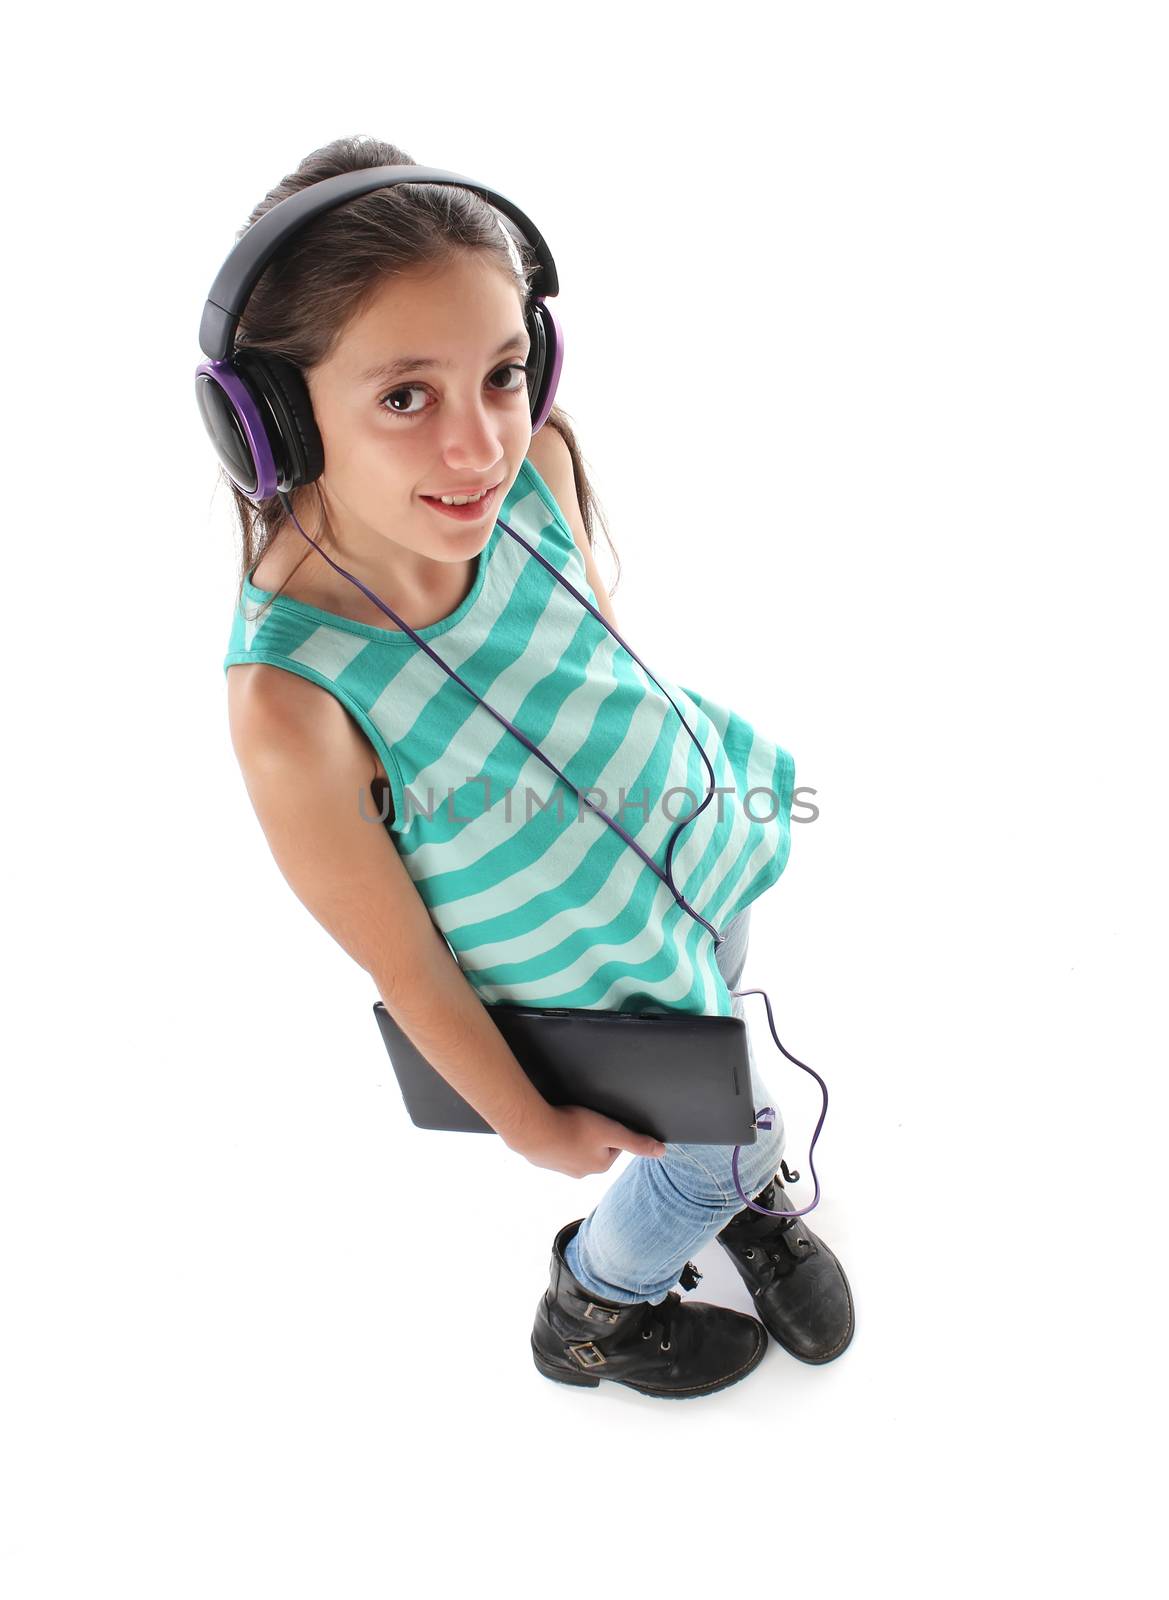 High angle picture for a beautiful pre-teen girl using a tablet computer and headphones. White background